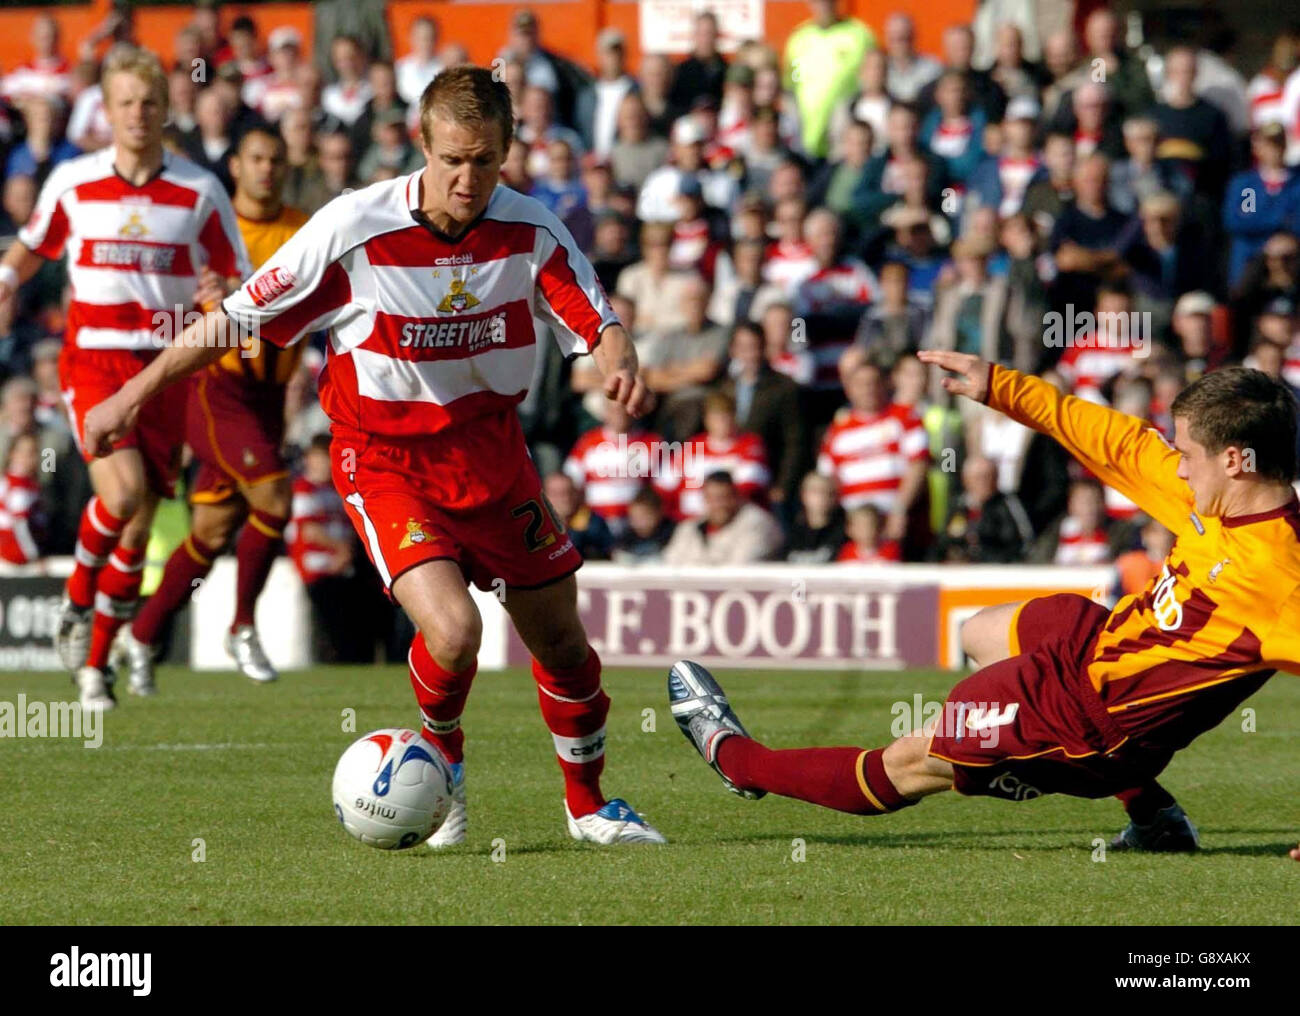 Doncaster's James Coppinger (L) tries to escape a challenge from Bradford's Andrew Taylor during the Coca-Cola League One match at Belle Vue, Doncaster, Saturday October 1, 2005. PRESS ASSOCIATION Photo. Photo credit should read: John Jones/PA. NO UNOFFICIAL CLUB WEBSITE USE. Stock Photo